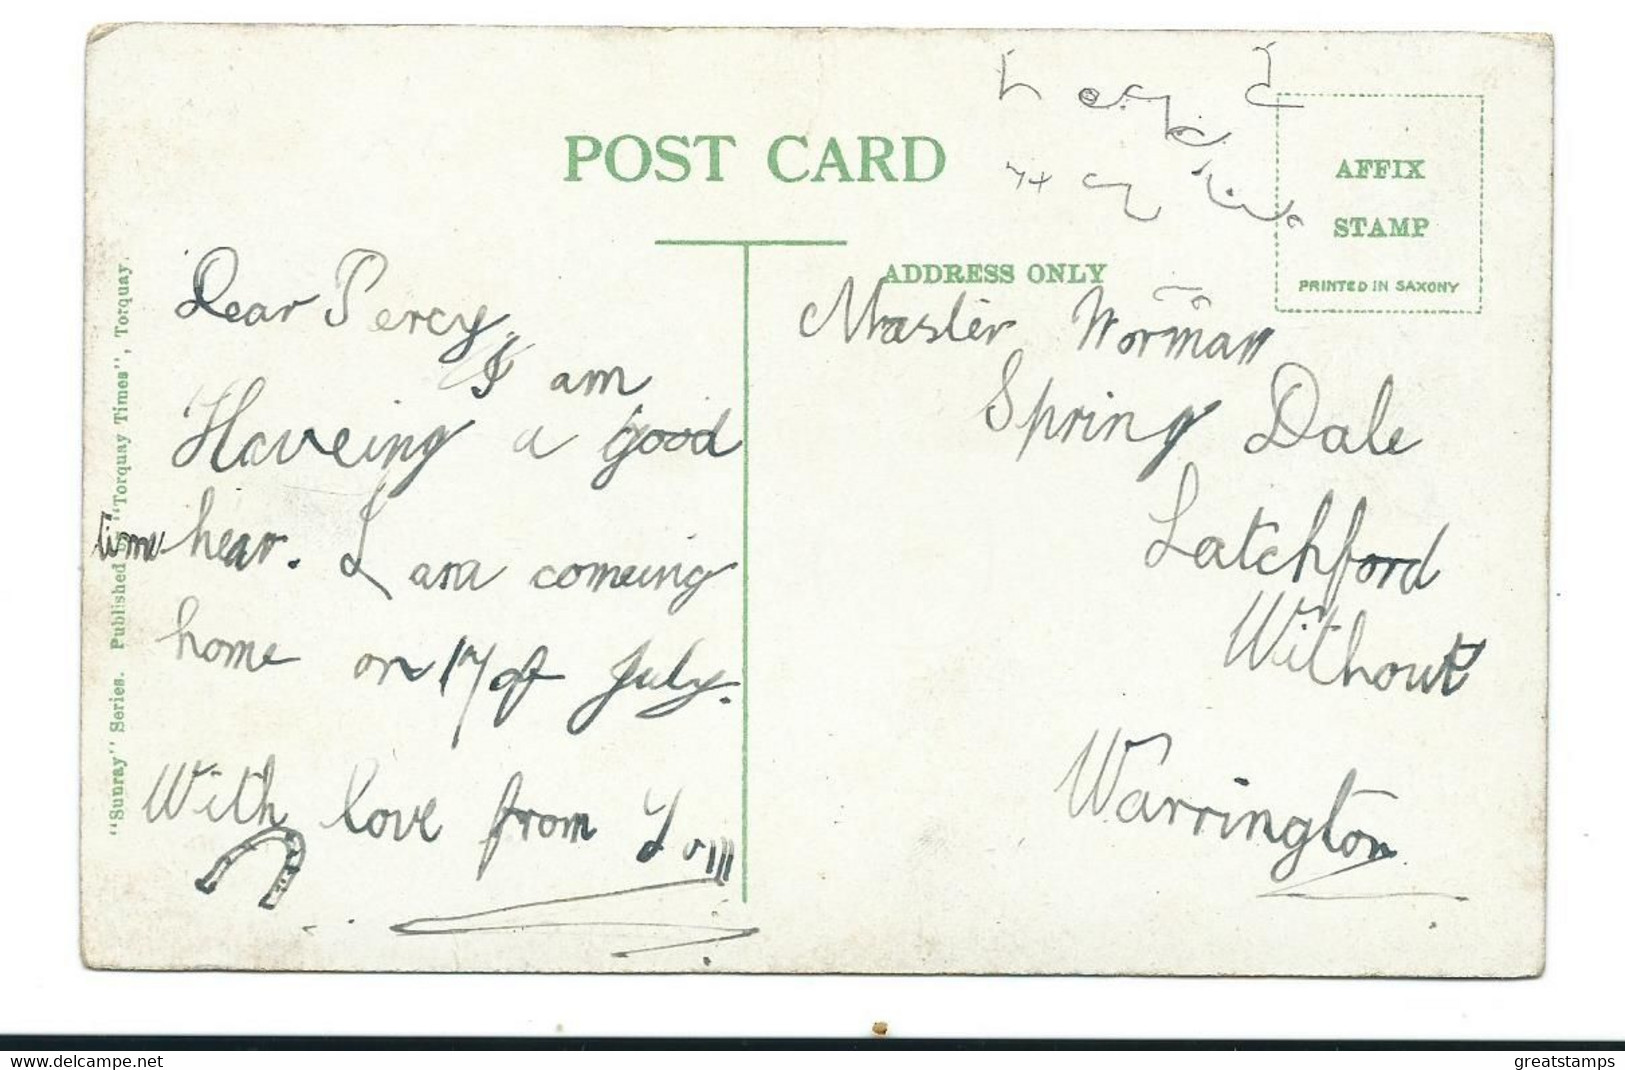 Cornwall  Postcard Newquay Thatcher Rock Kilmorie Used Not Posted - Newquay